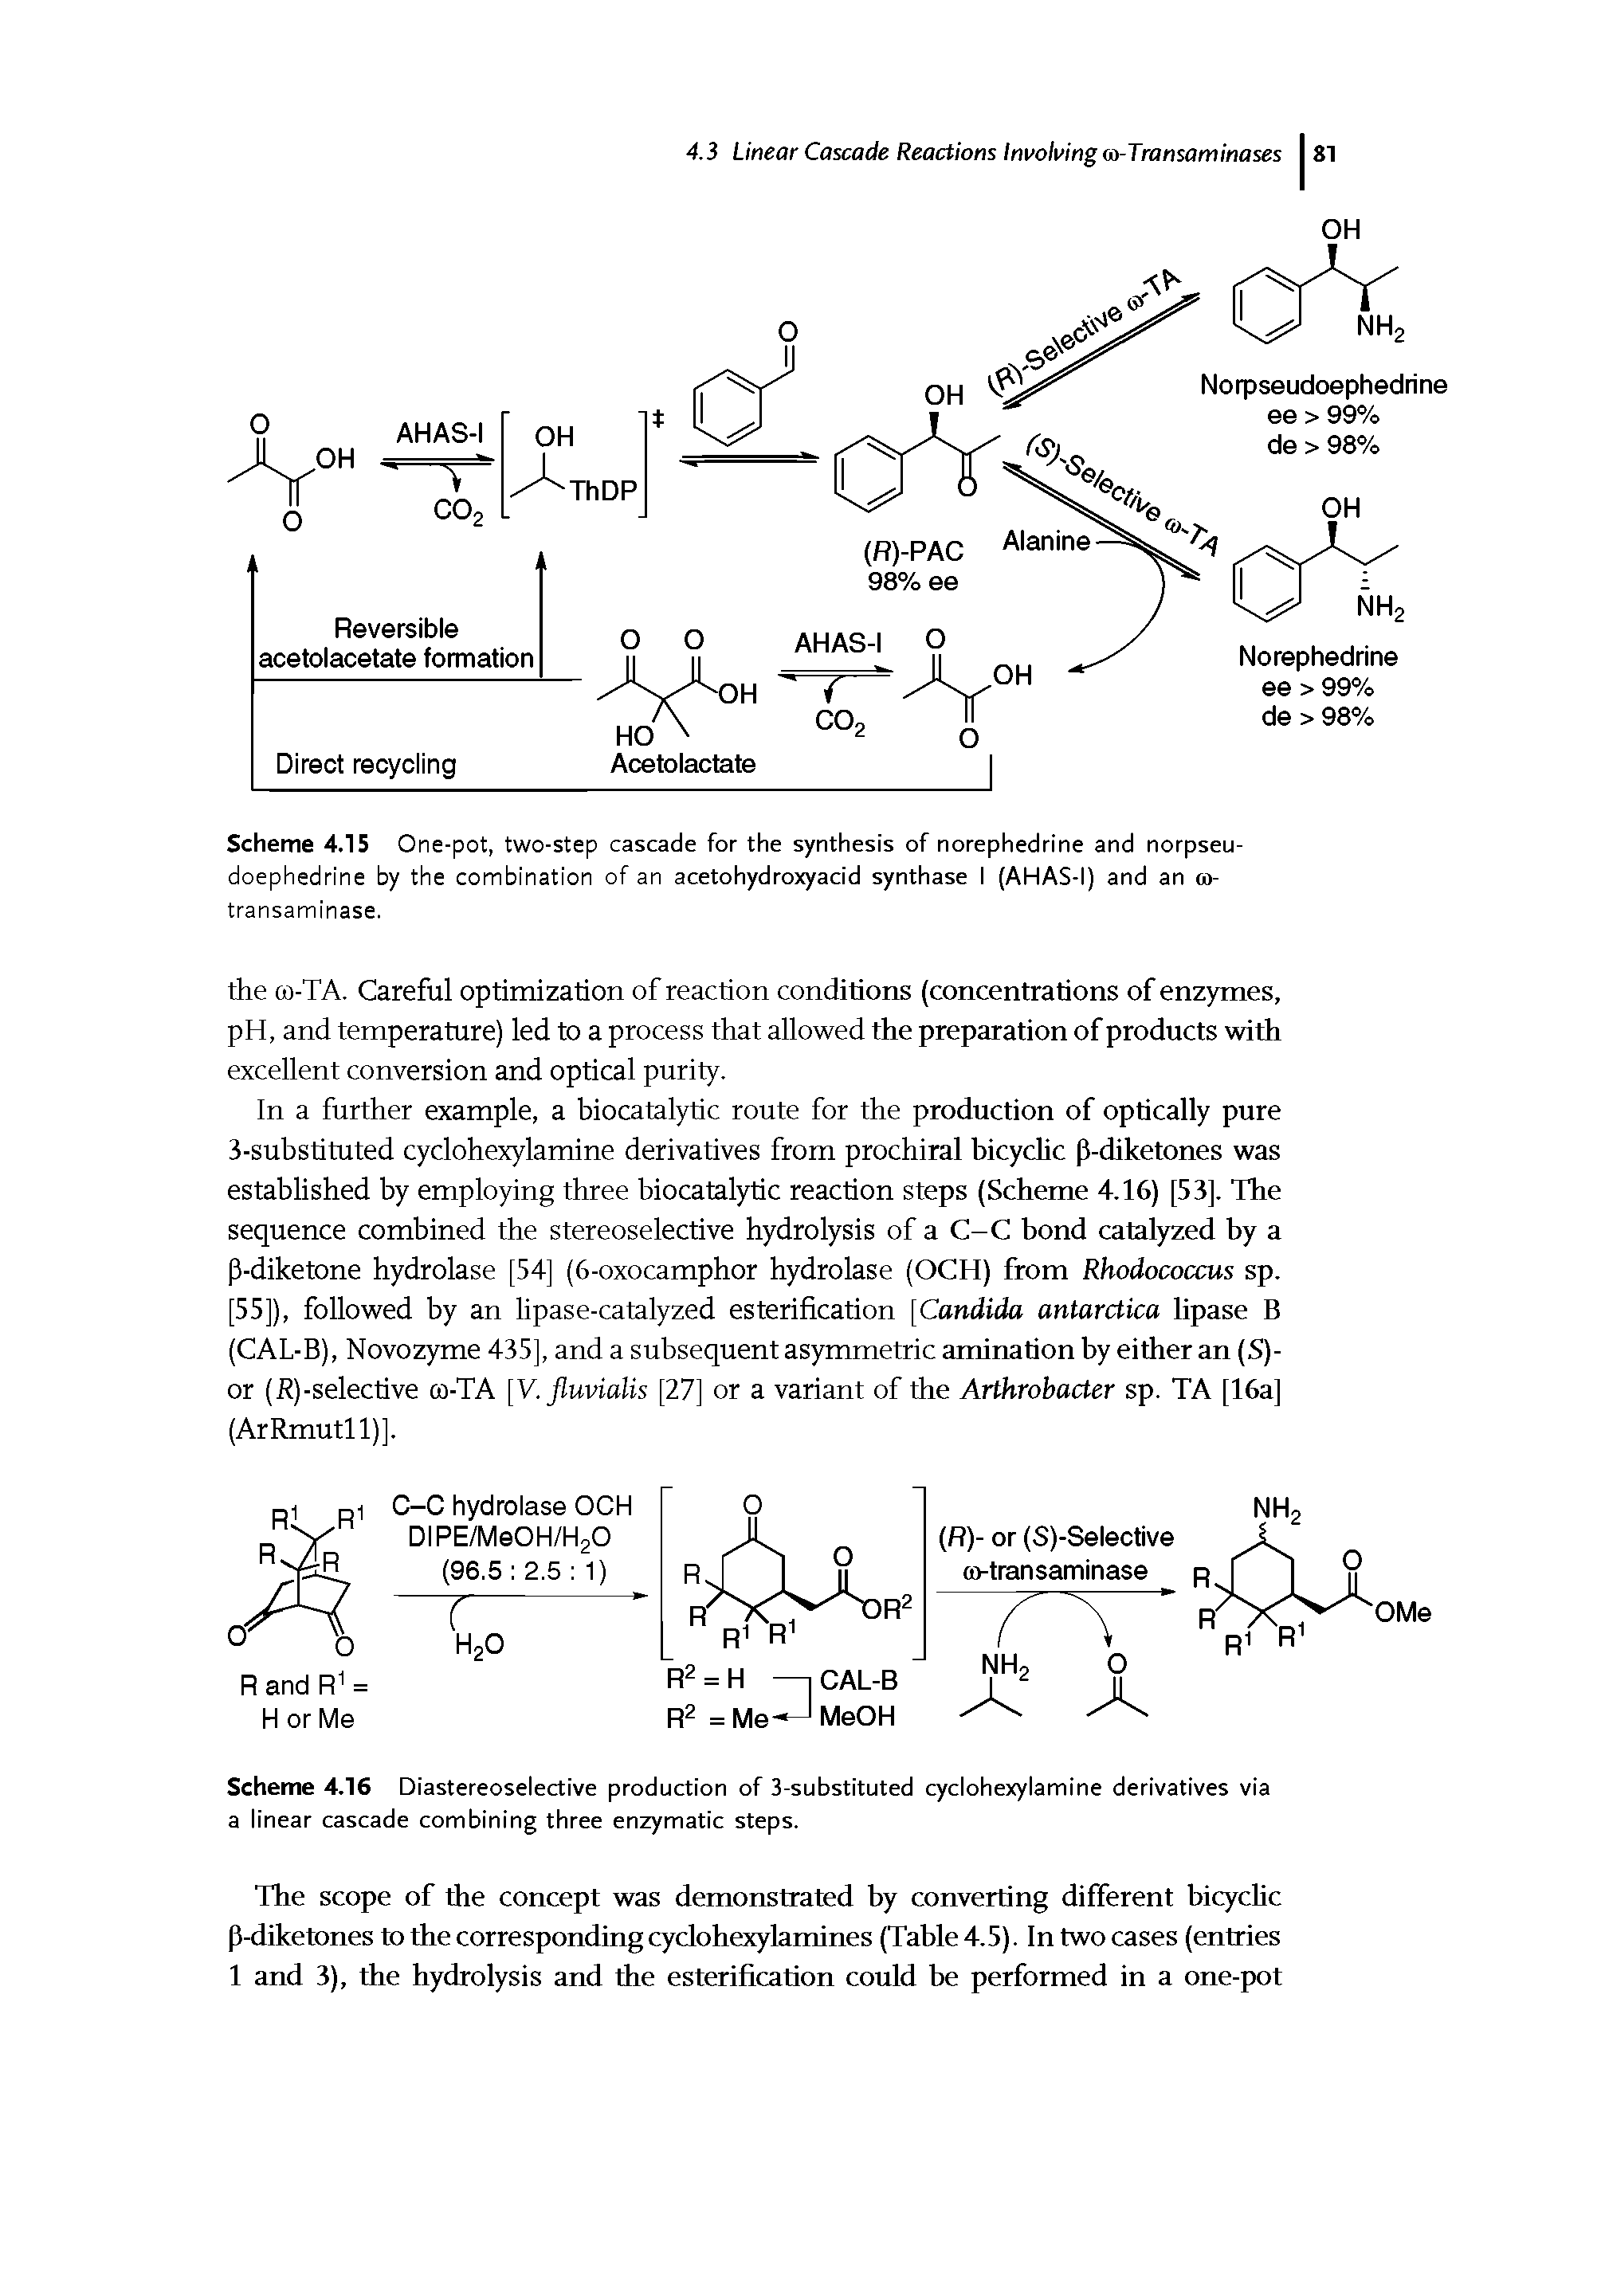 Scheme 4.16 Diastereoselective production of 3-substituted cyclohexylamine derivatives via a linear cascade combining three enzymatic steps.